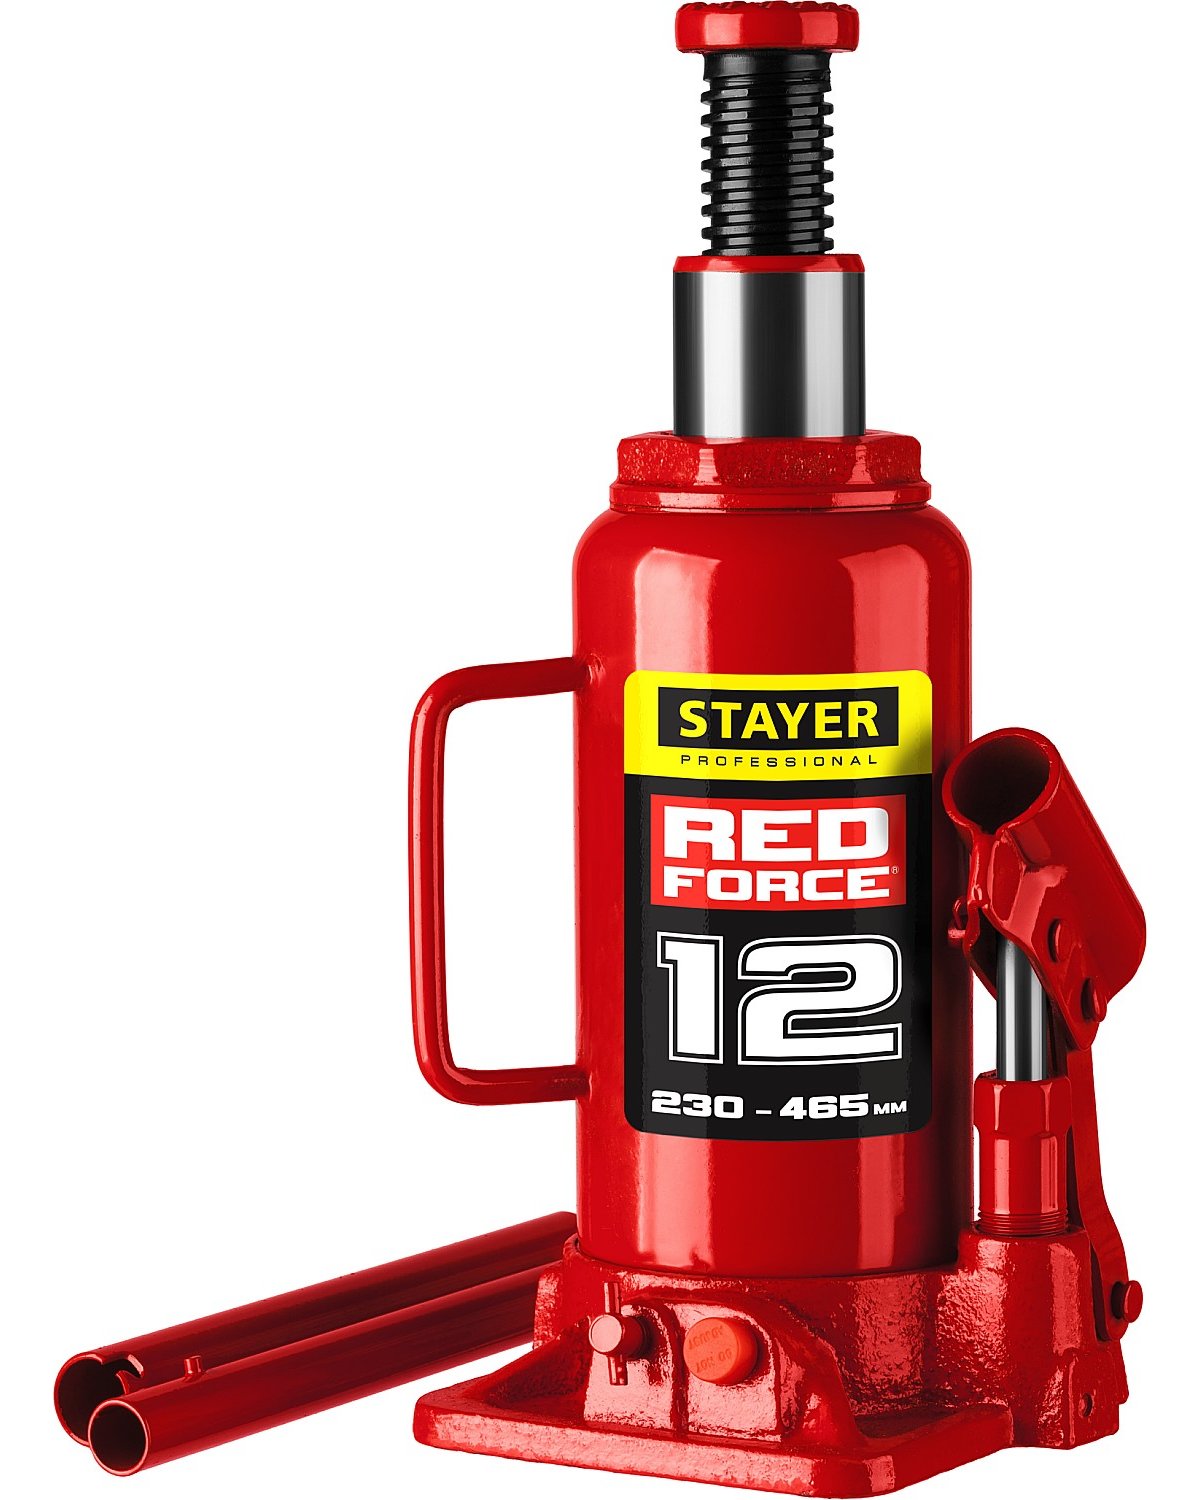    STAYER RED FORCE 12 230-465  (43160-12_z01)